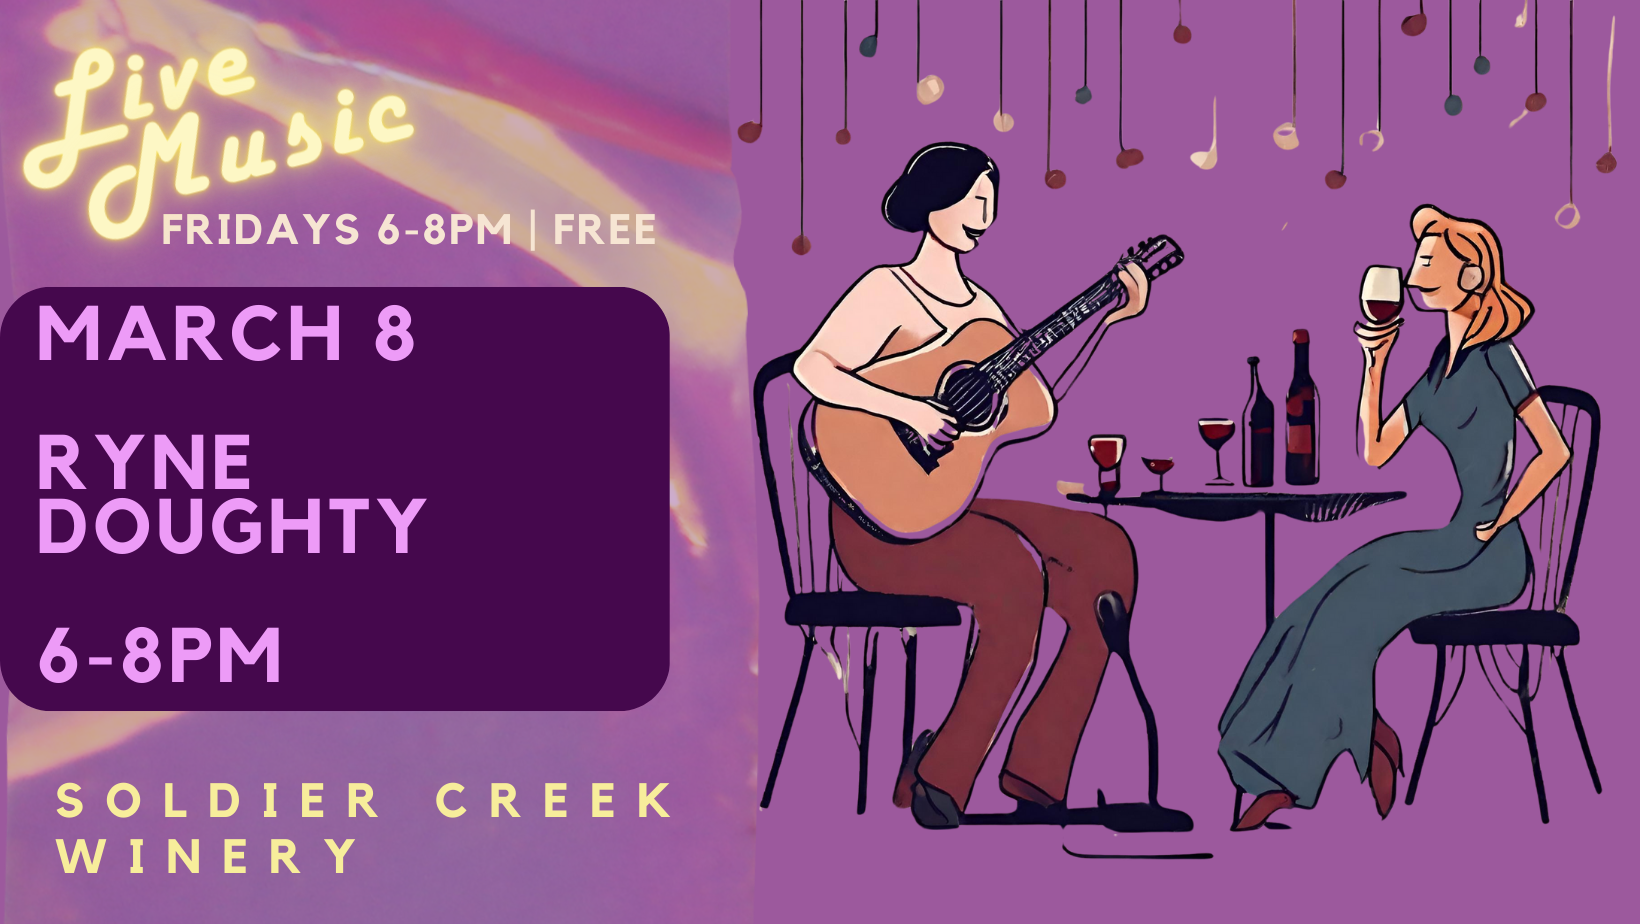 free, live music every friday at soldier creek winery. march 8 is ryne doughty from 6-8pm. free to listen.